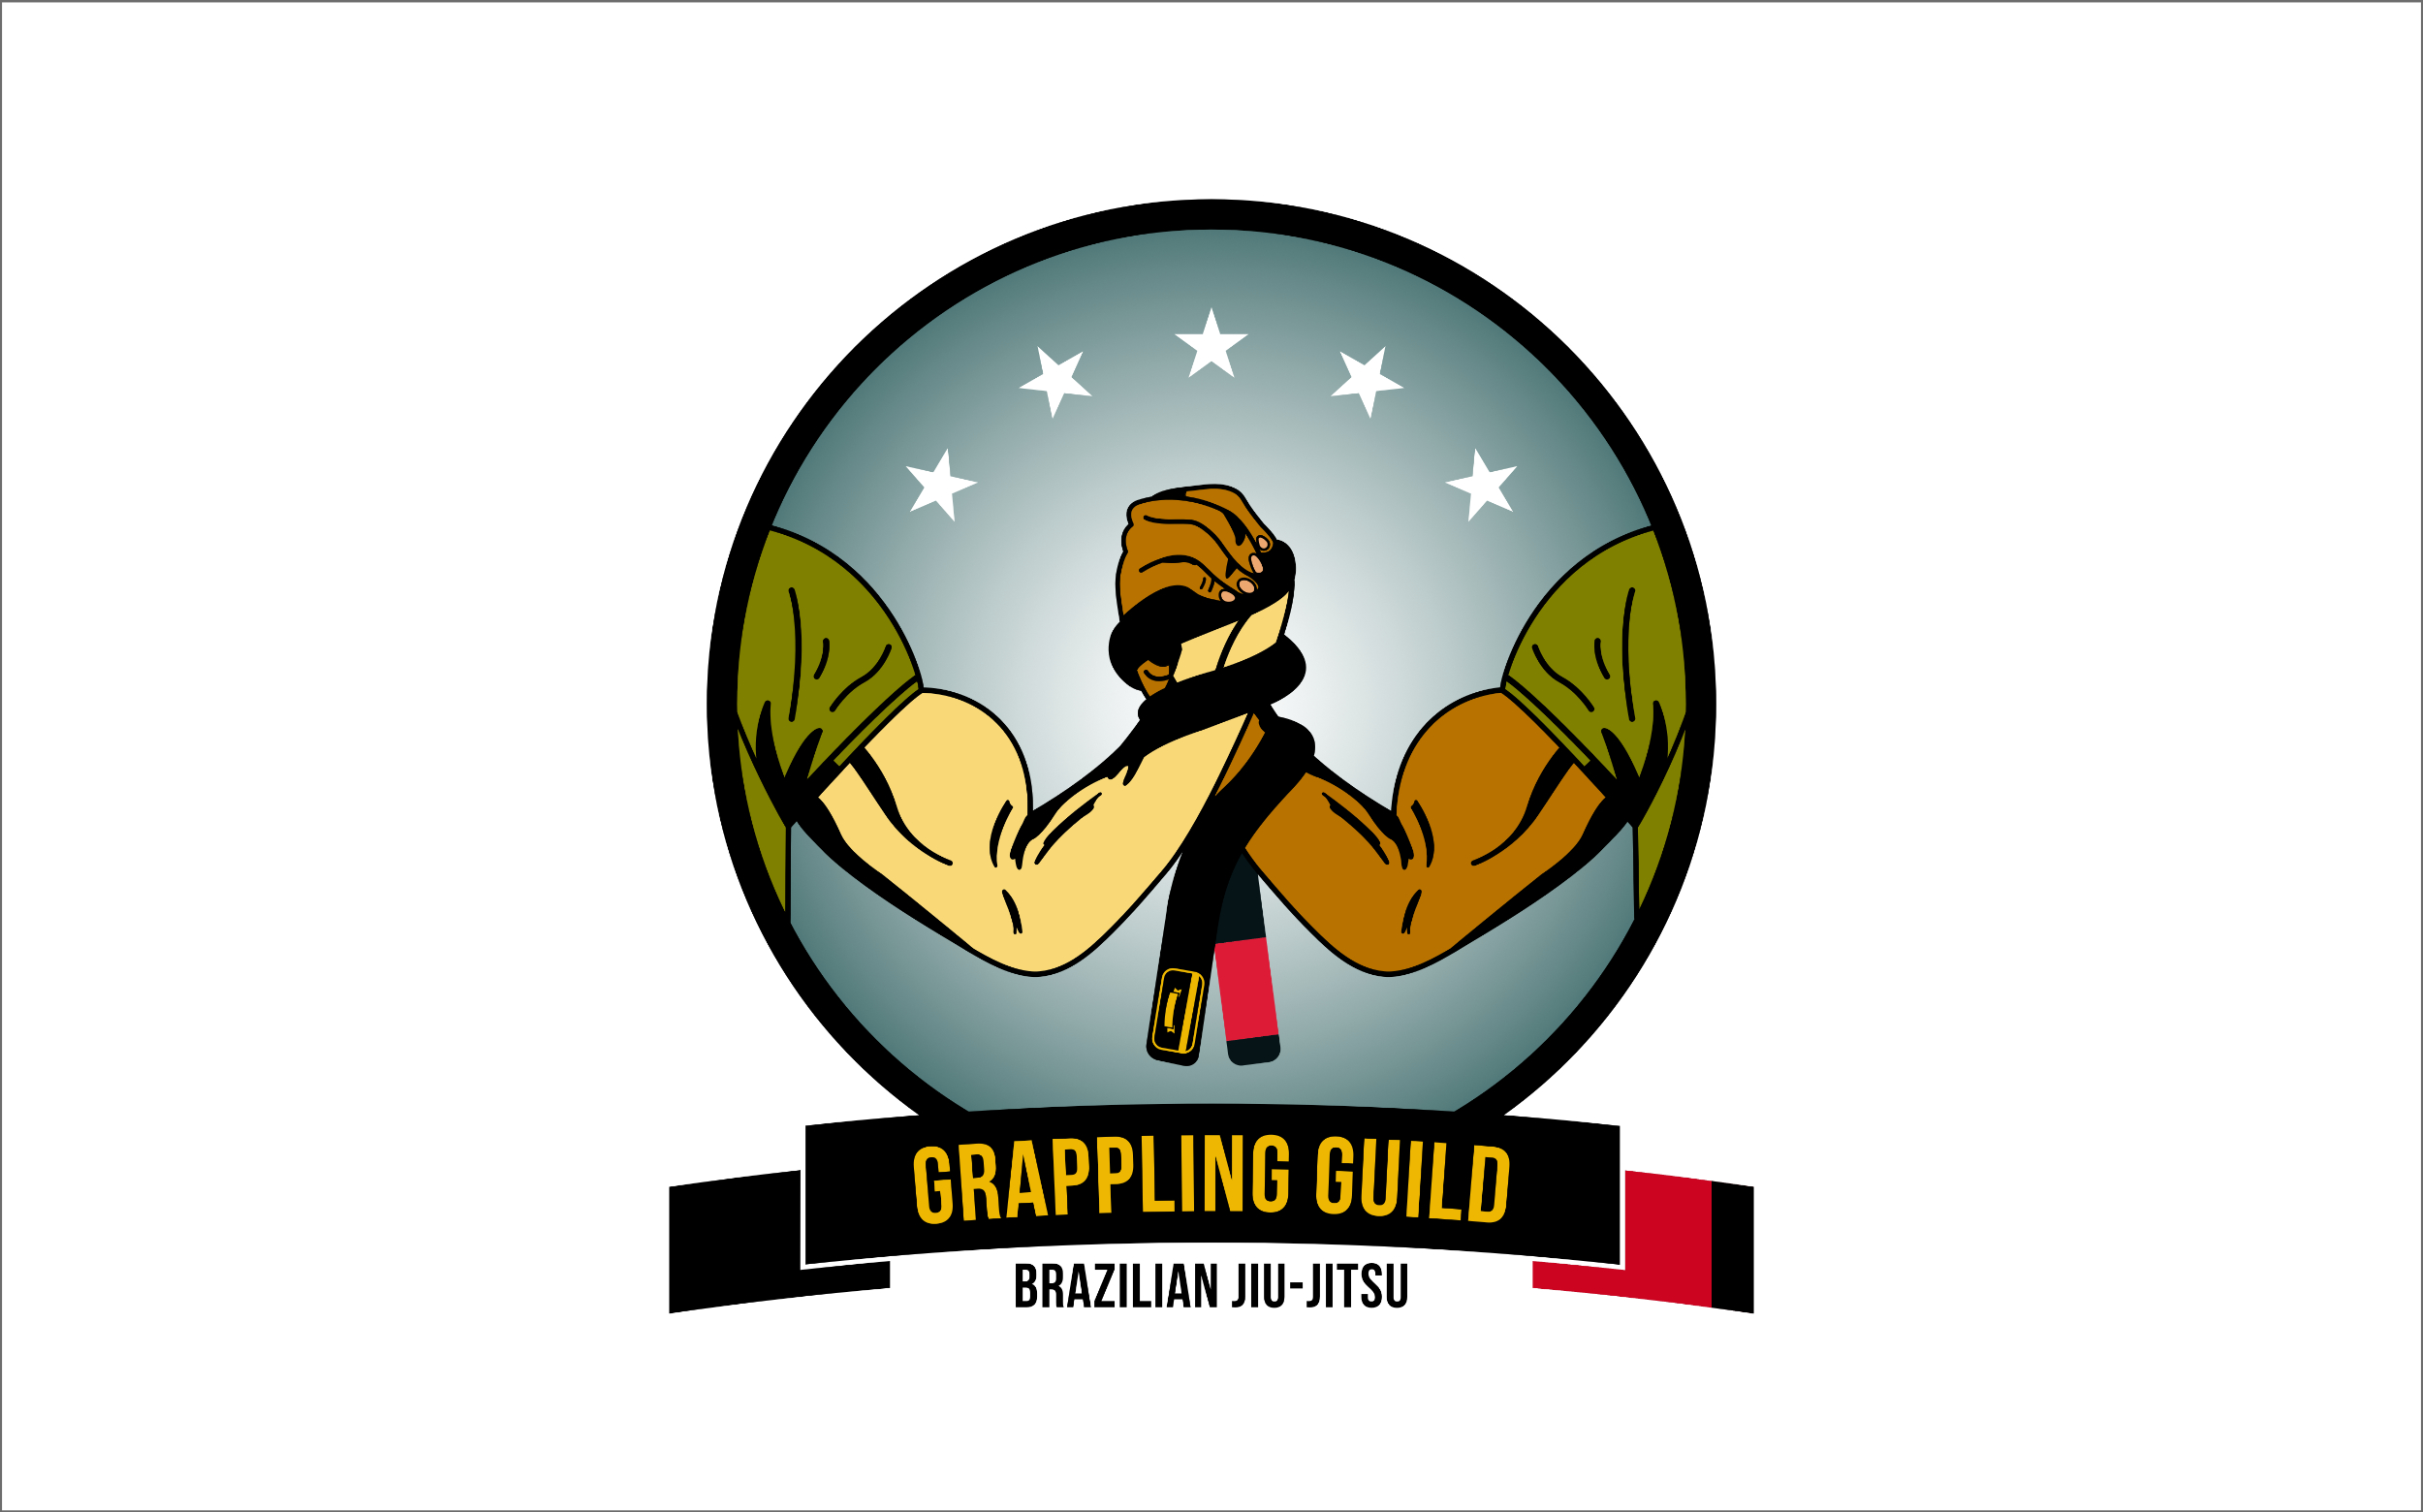 Logo Design for Grappling Guild.  Made by Jon Glanville - Plymouth Graphic Designer.